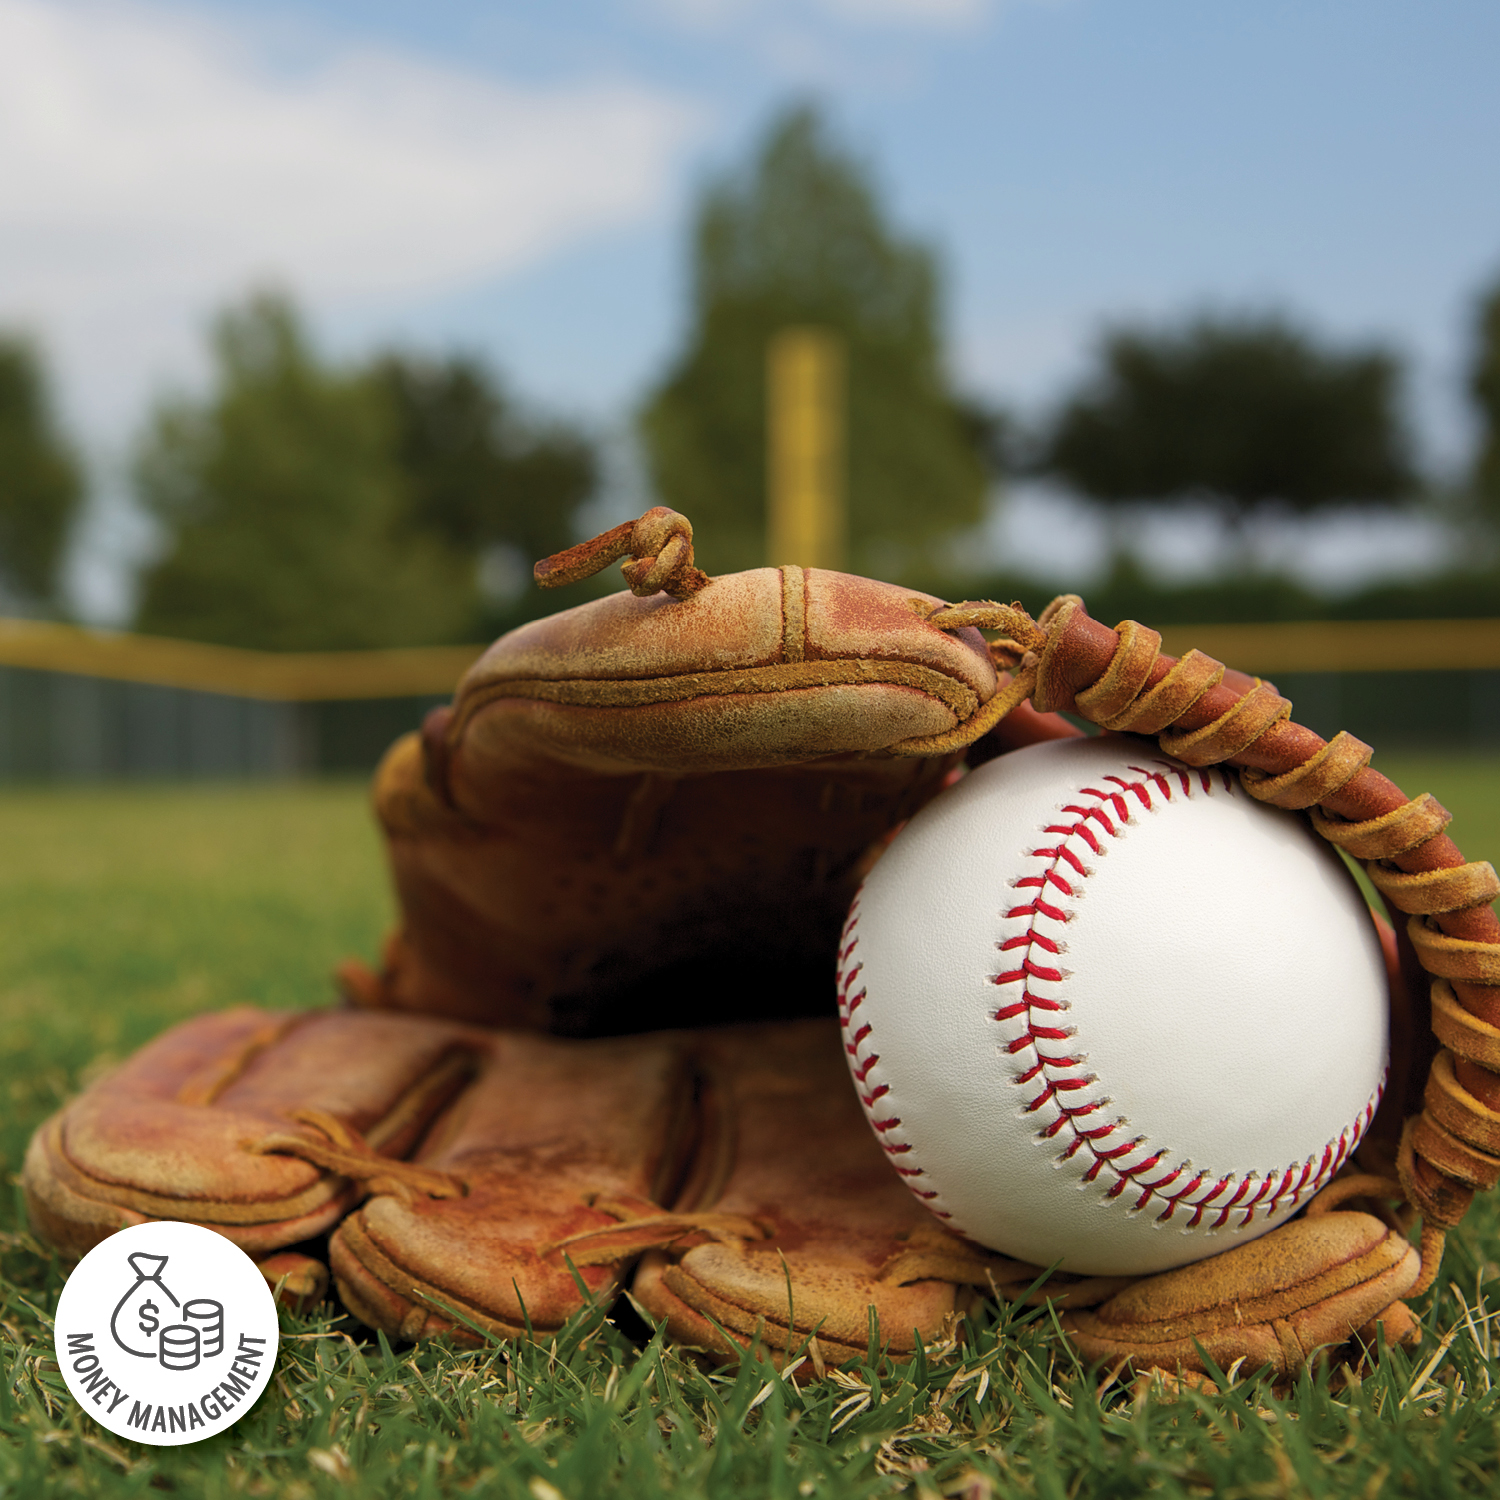 7 Financial Lessons You Can Learn from Baseball